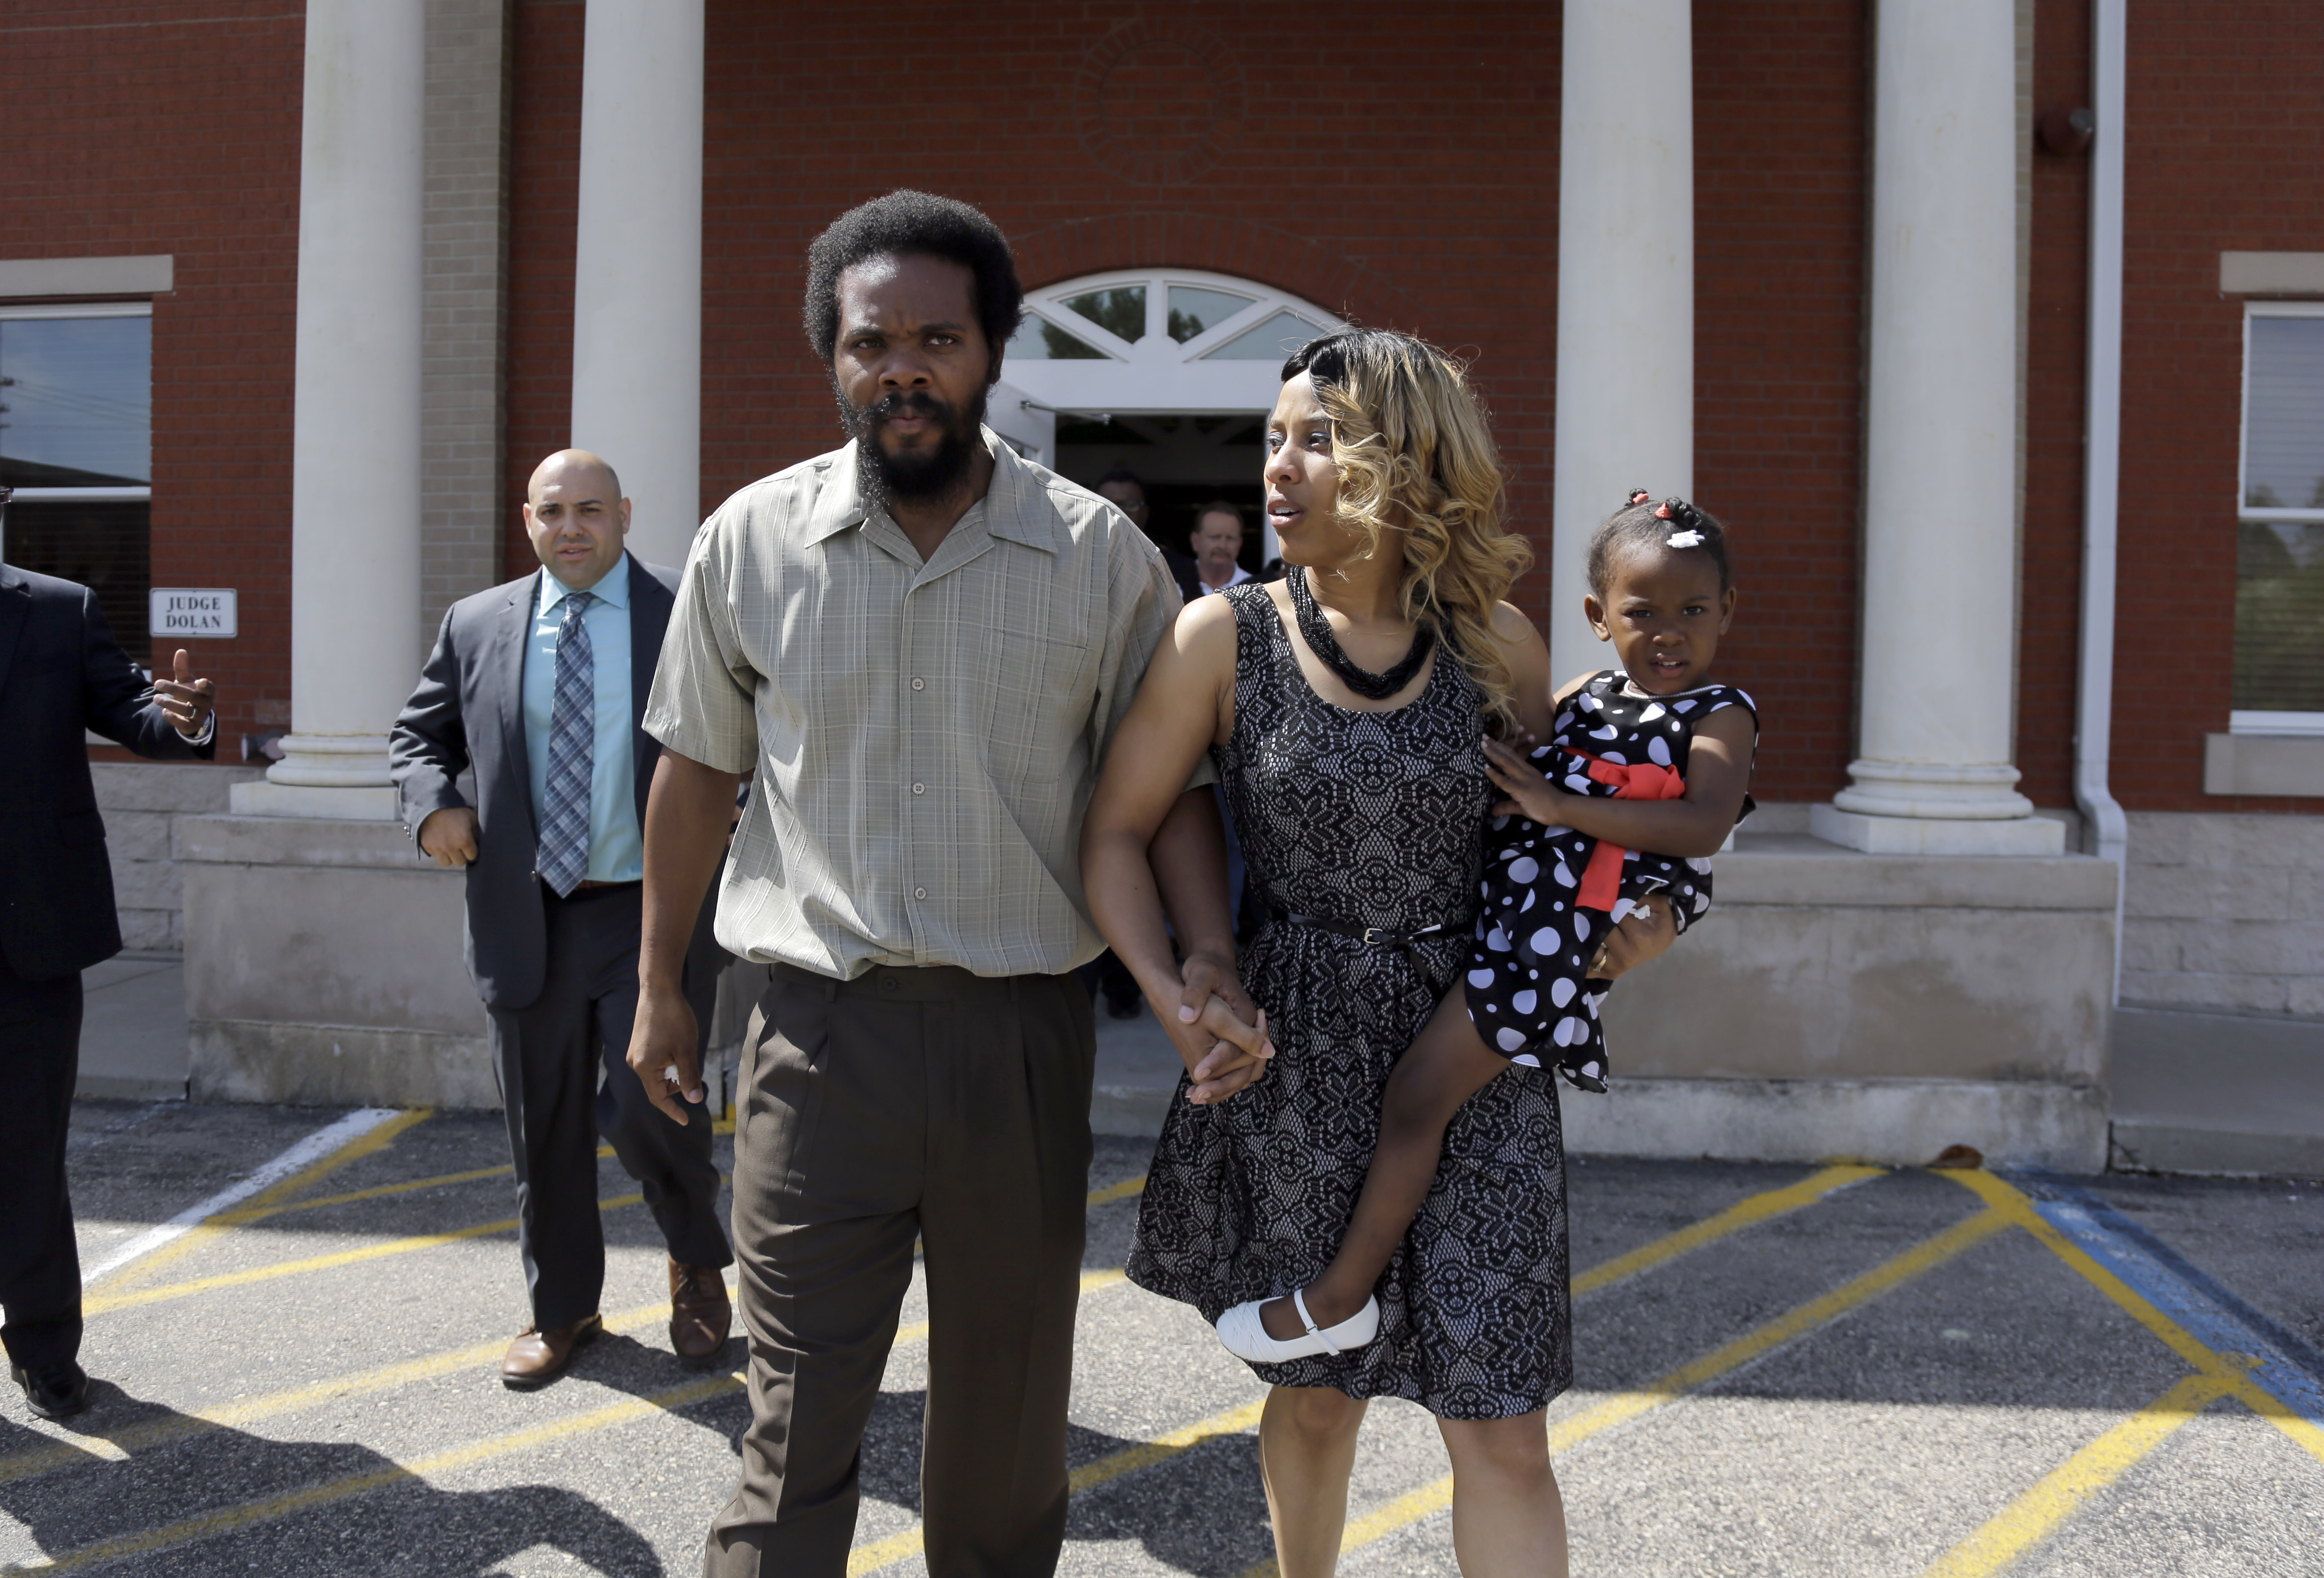 Cornealious "Mike" Anderson walks out of the Mississippi County Courthouse along with his wife LaQonna Anderson, right, their daughter Nevaeh, 3, and his attorney Patrick Megaro, left, Monday, May 5, 2014, in Charleston, Mo. (Jeff Roberson—AP)